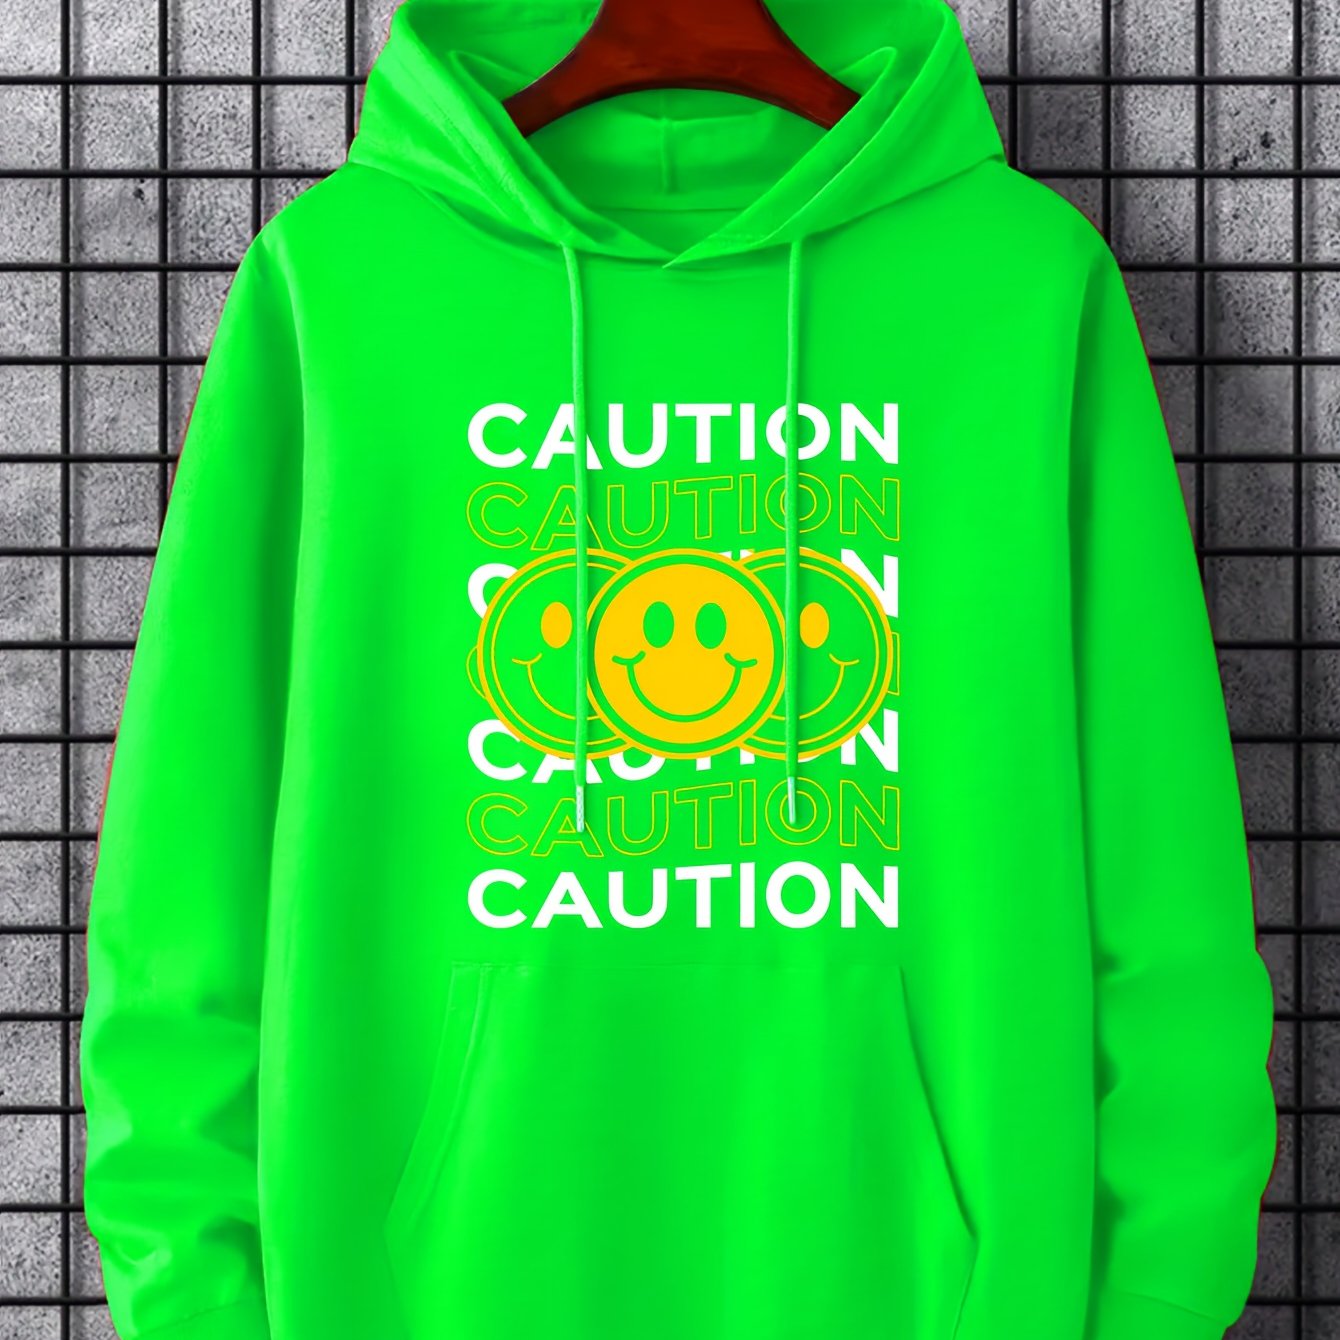 Caution Letter & Smiling Face Pattern Men's Hoodie Sweatshirt With